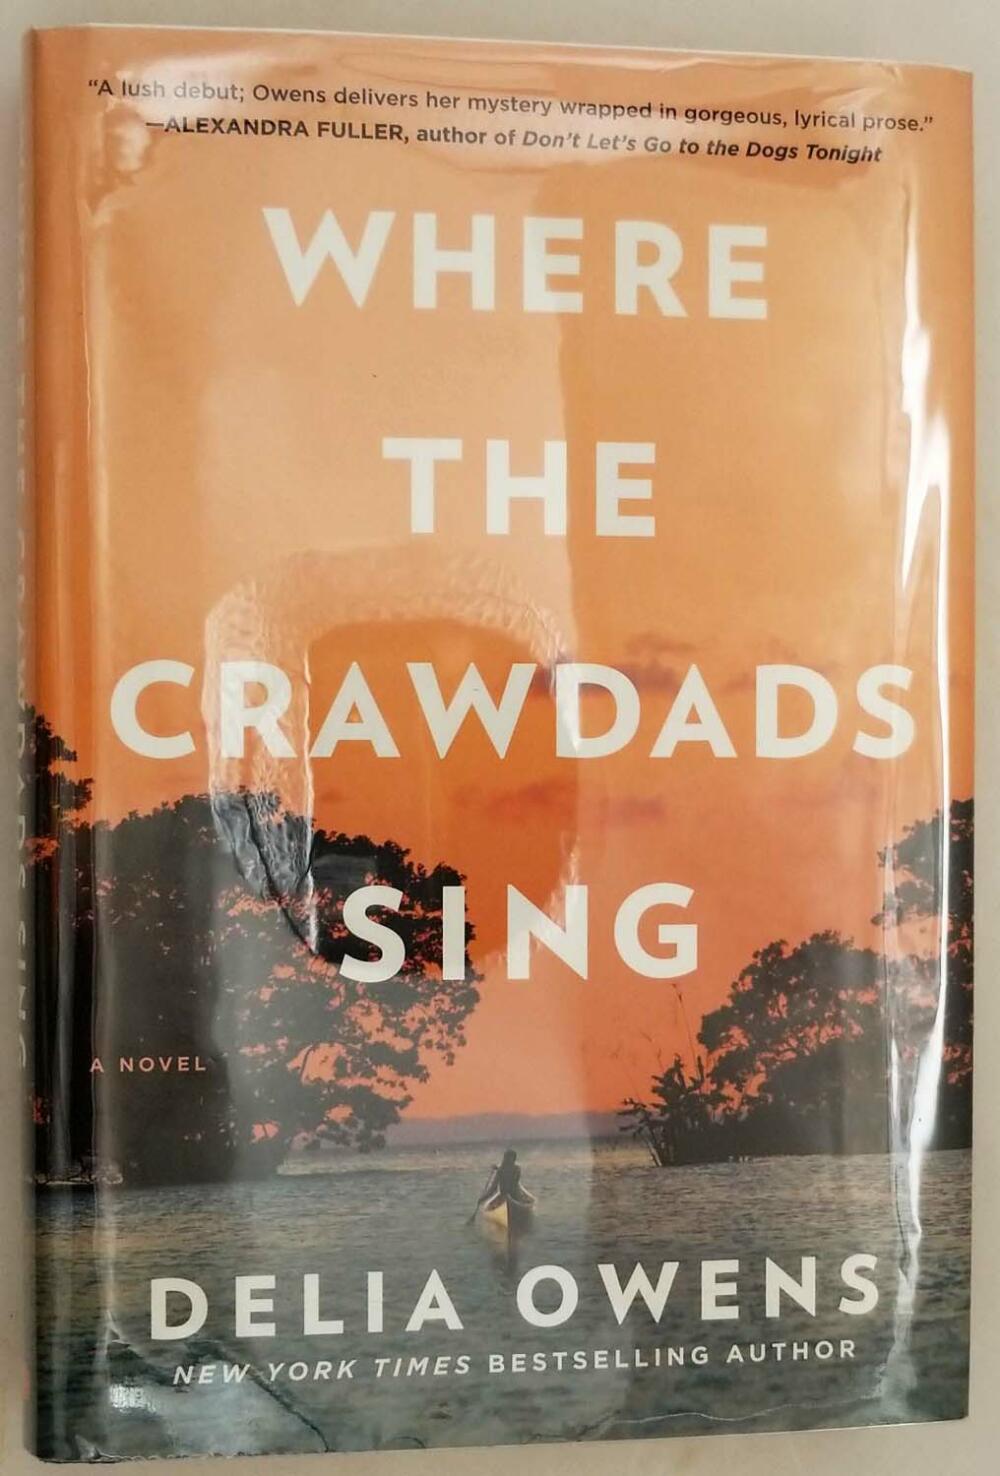 Where the Crawdads Sing - Delia Owens 2018 | 1st Edition